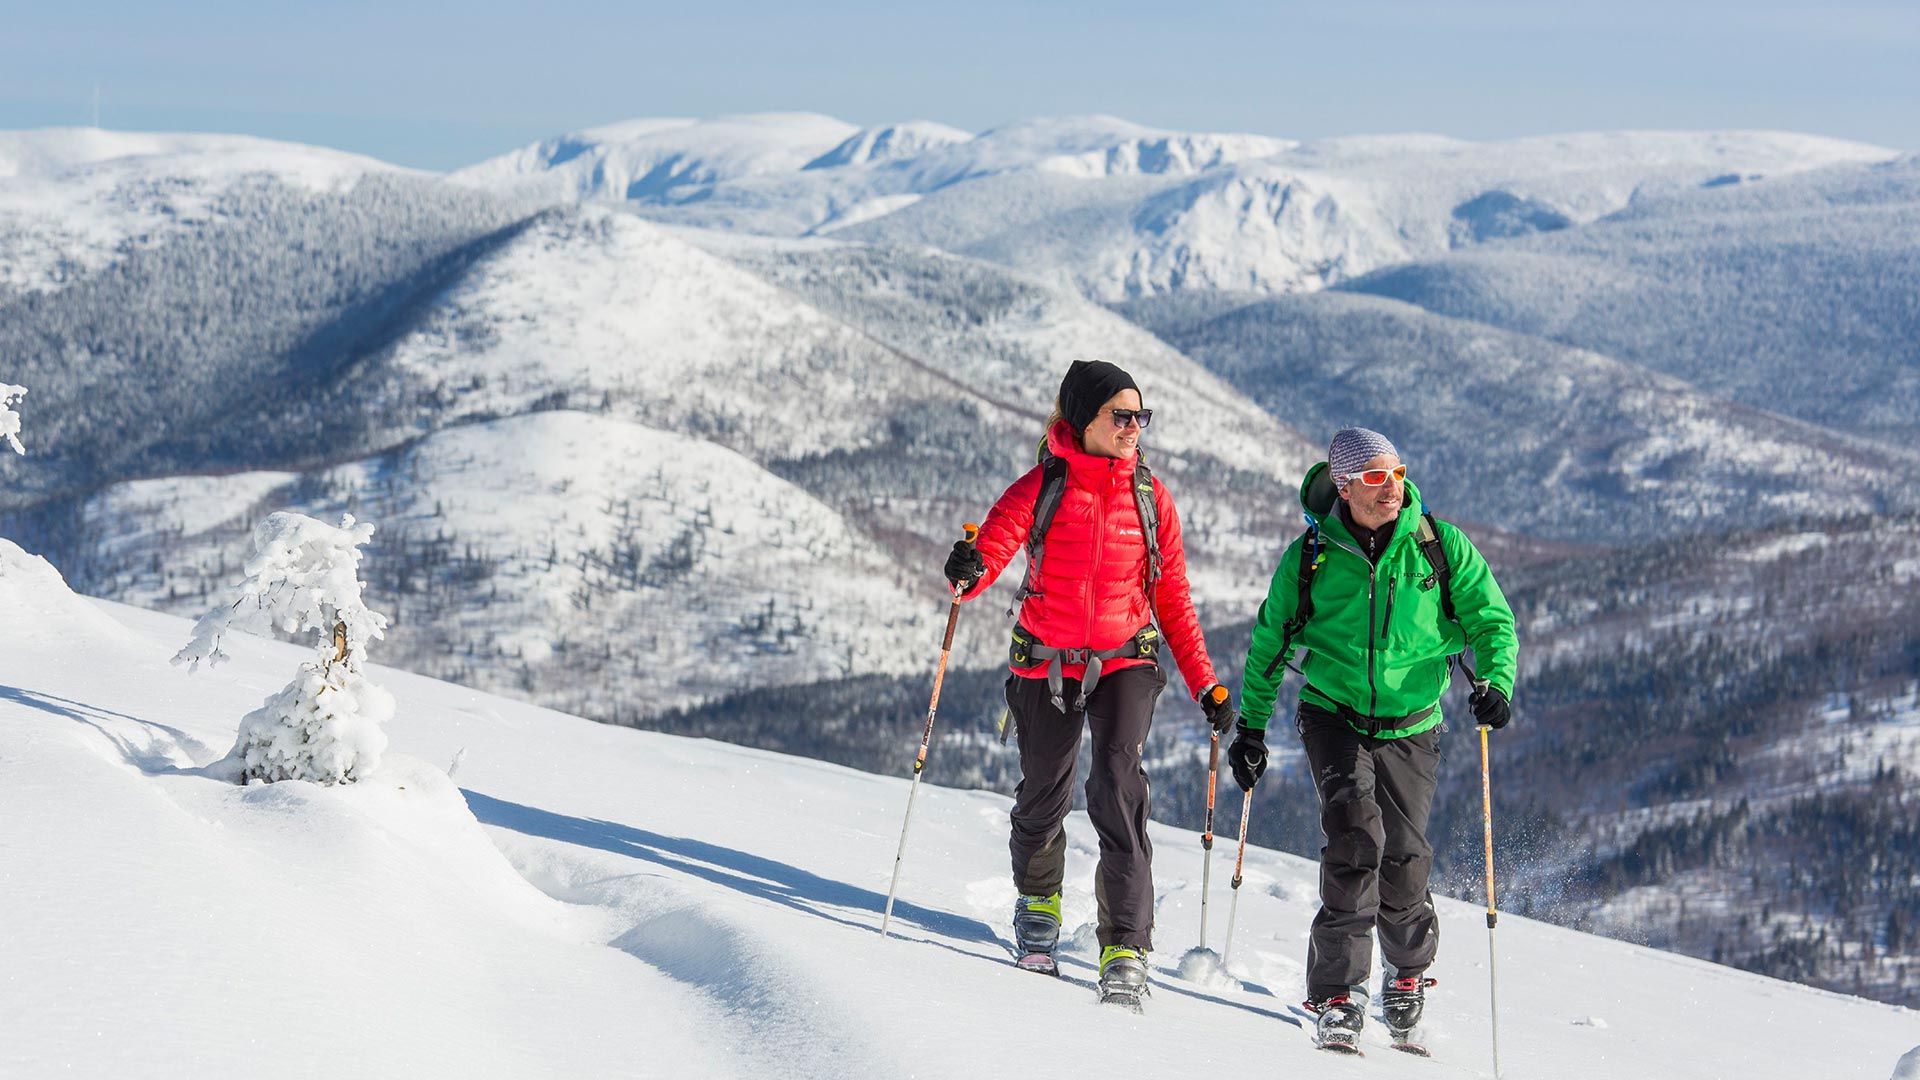 Two skiers in the mountains of Parc national de la Gaspésie